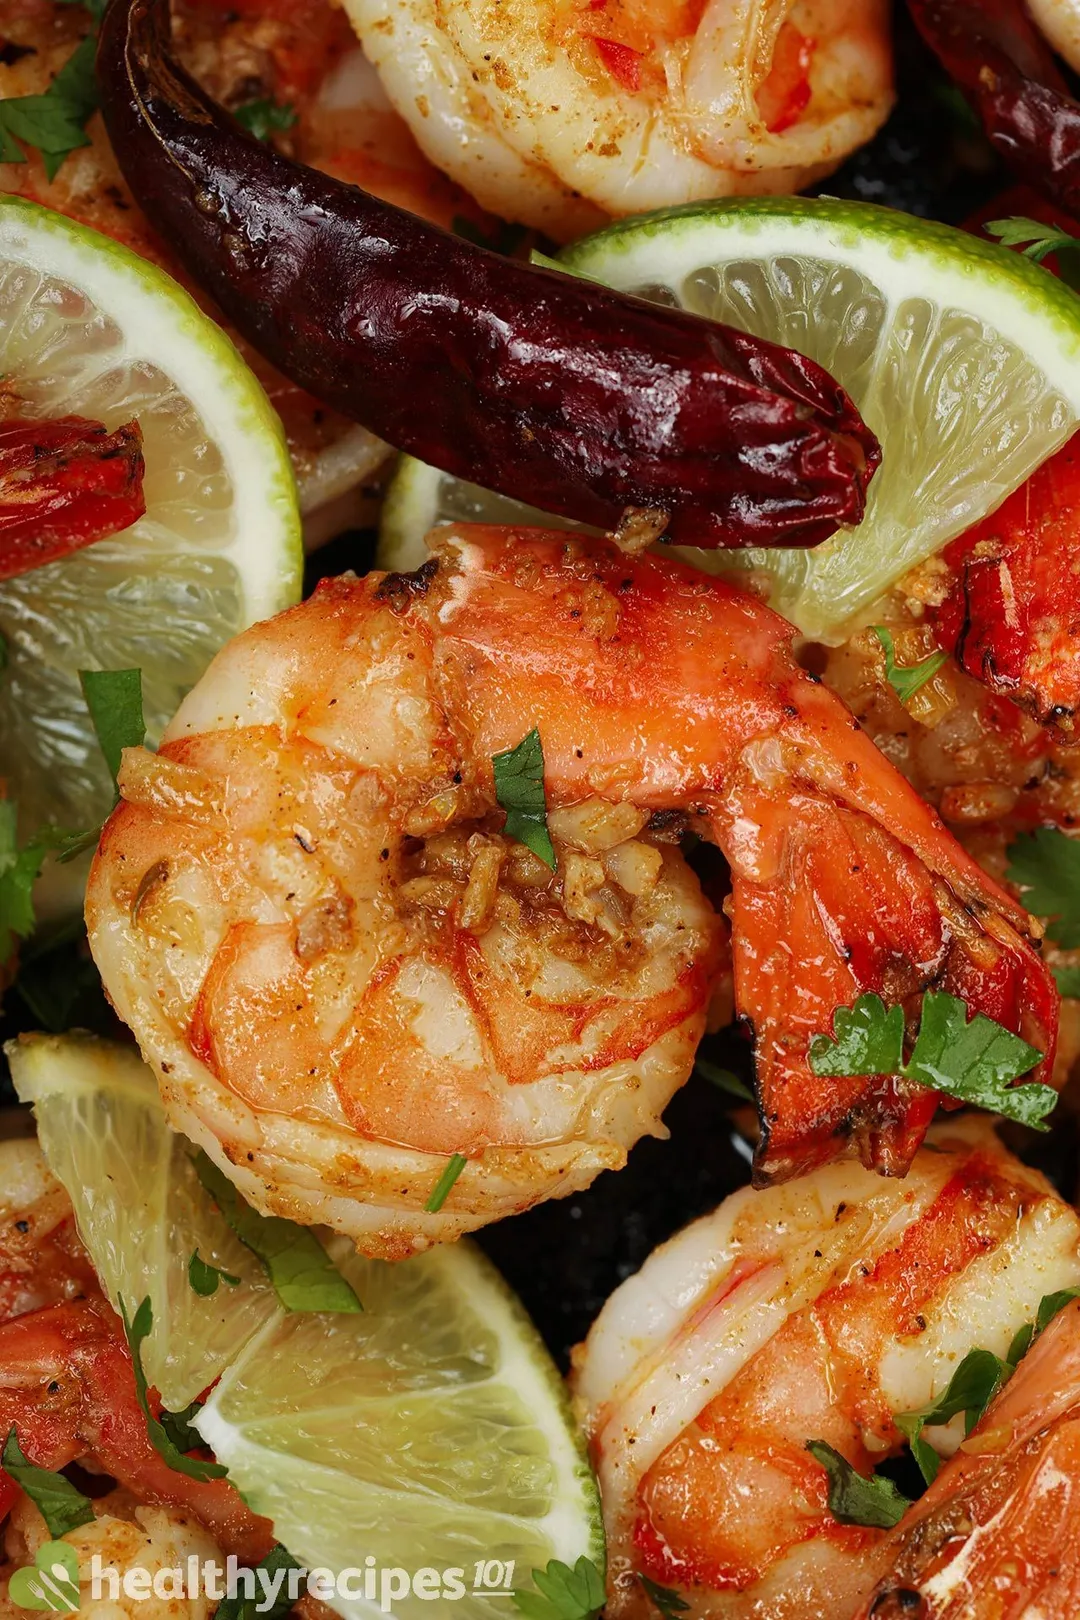 Chili Lime Shrimp Quick and Full of Flavor